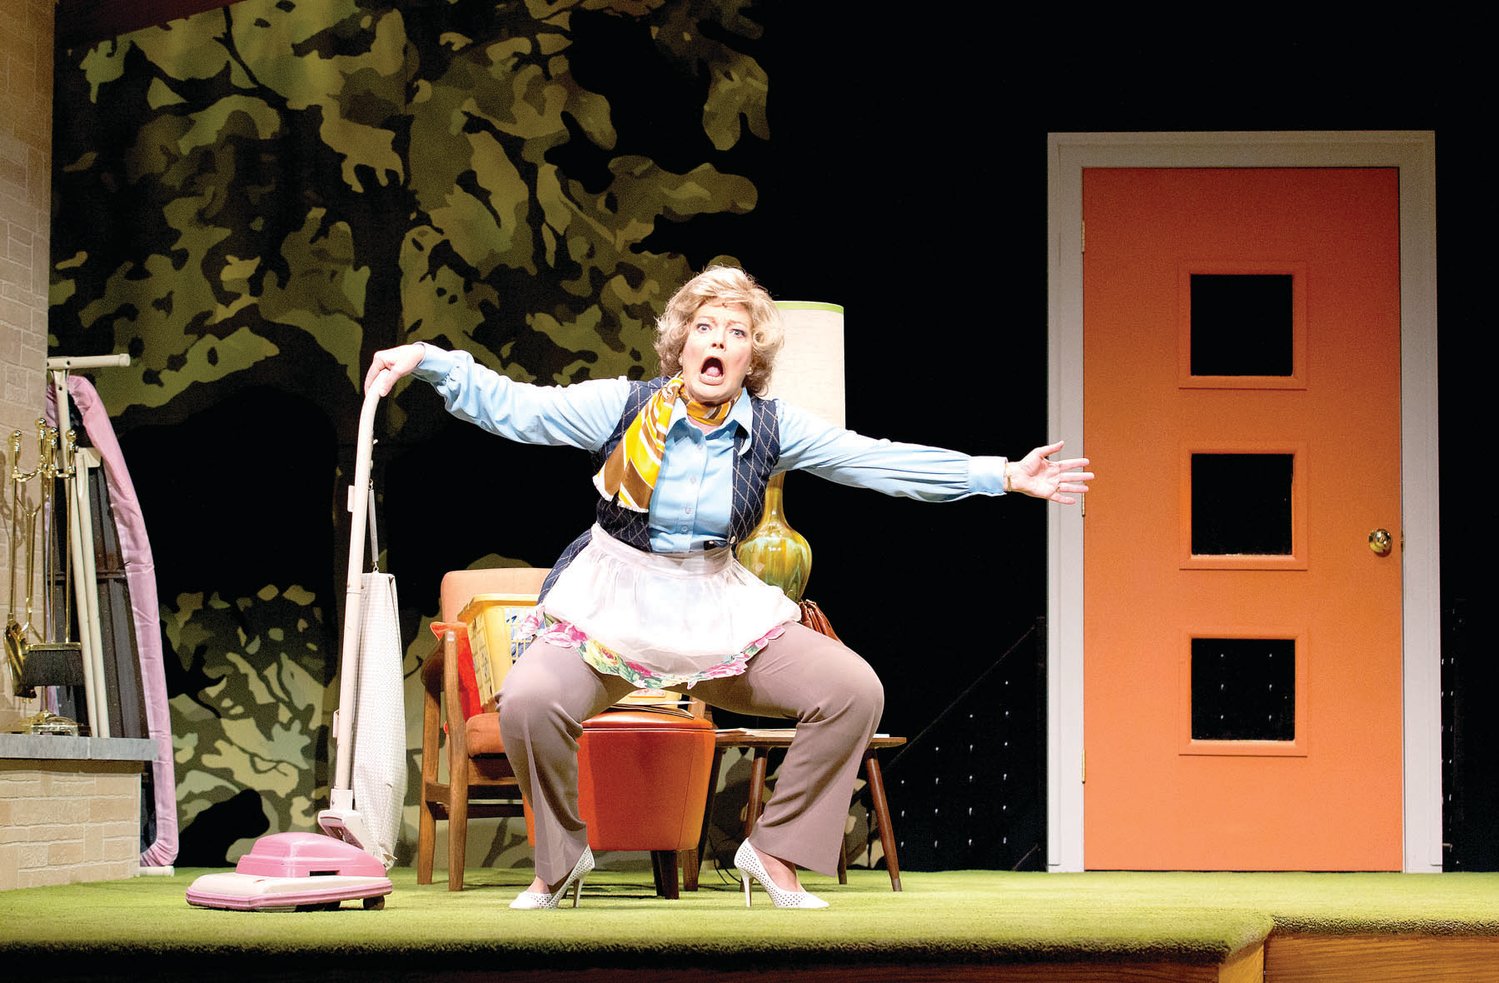 Licia Watson stars as Erma Bombeck at Bristol Riverside Theatre through Oct. 7. Photograph by Mark Garvin